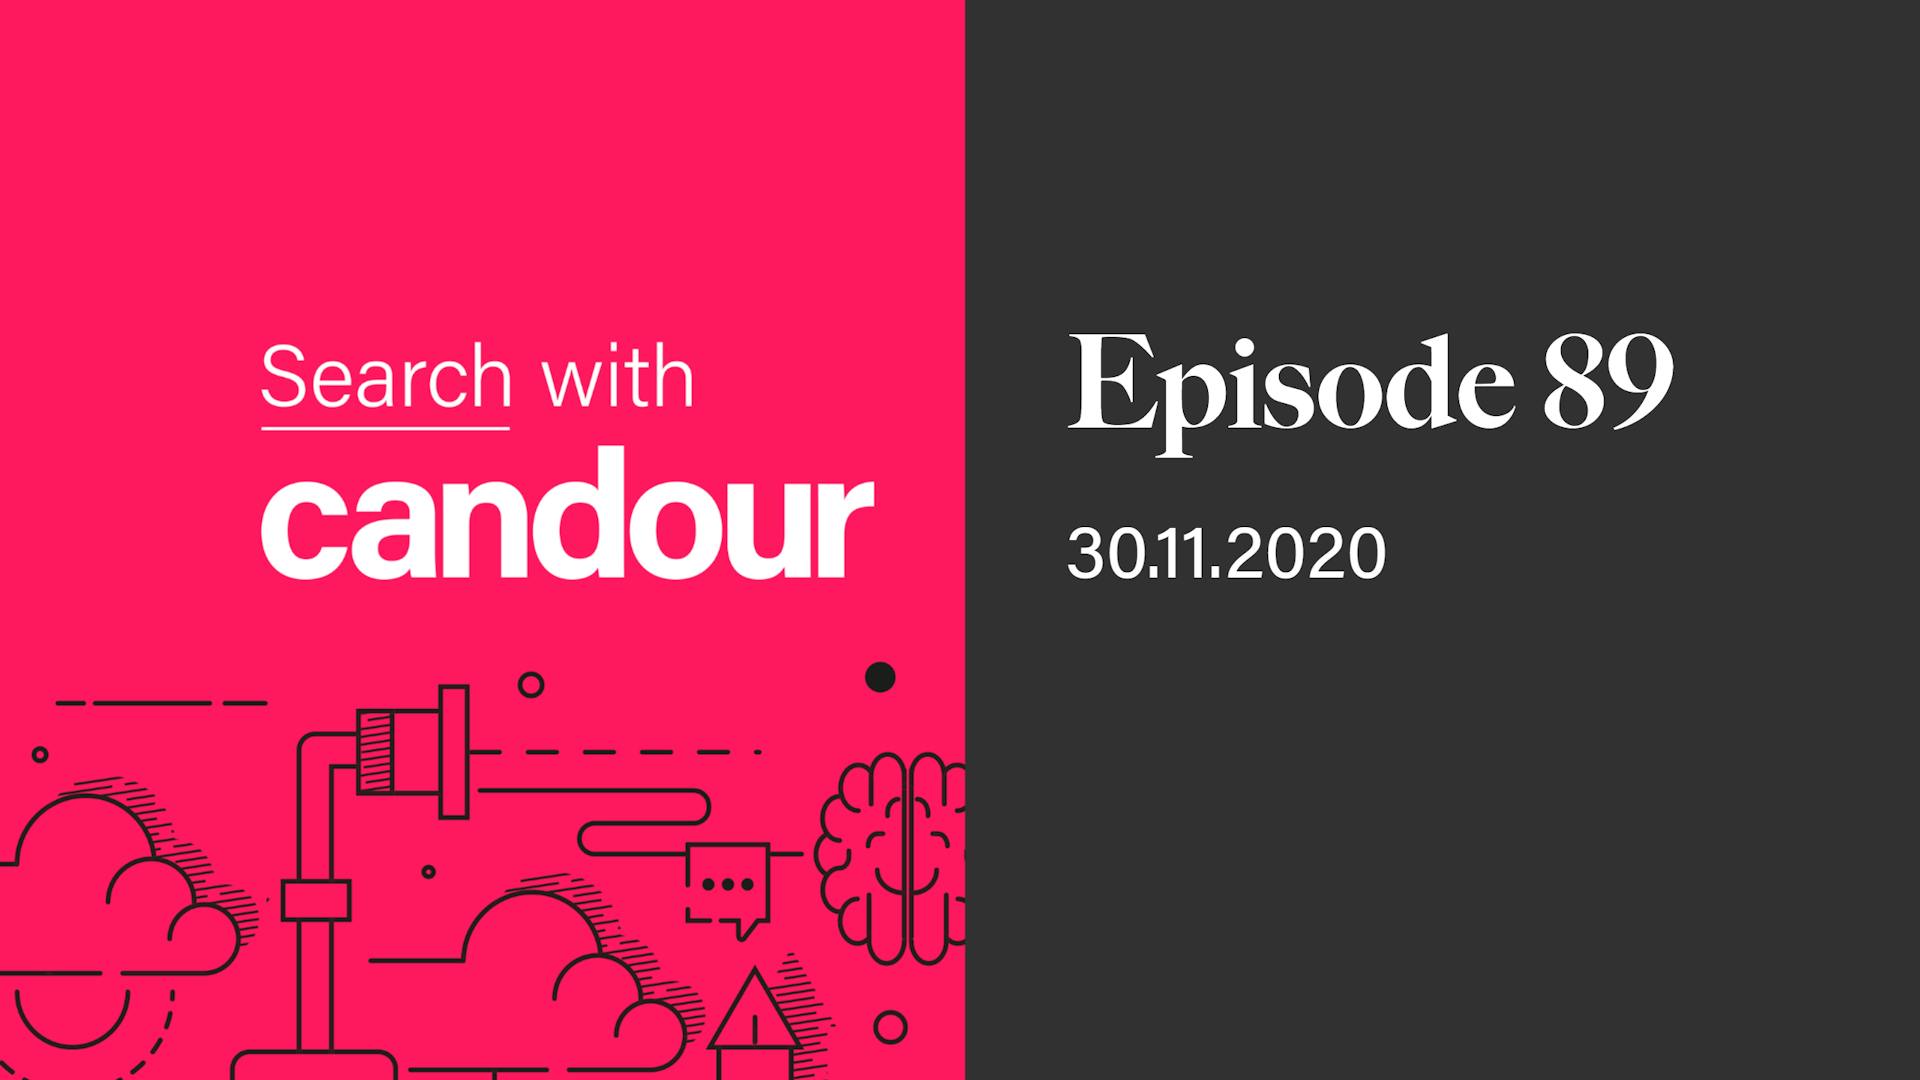 Episode 89 - Search with Candour